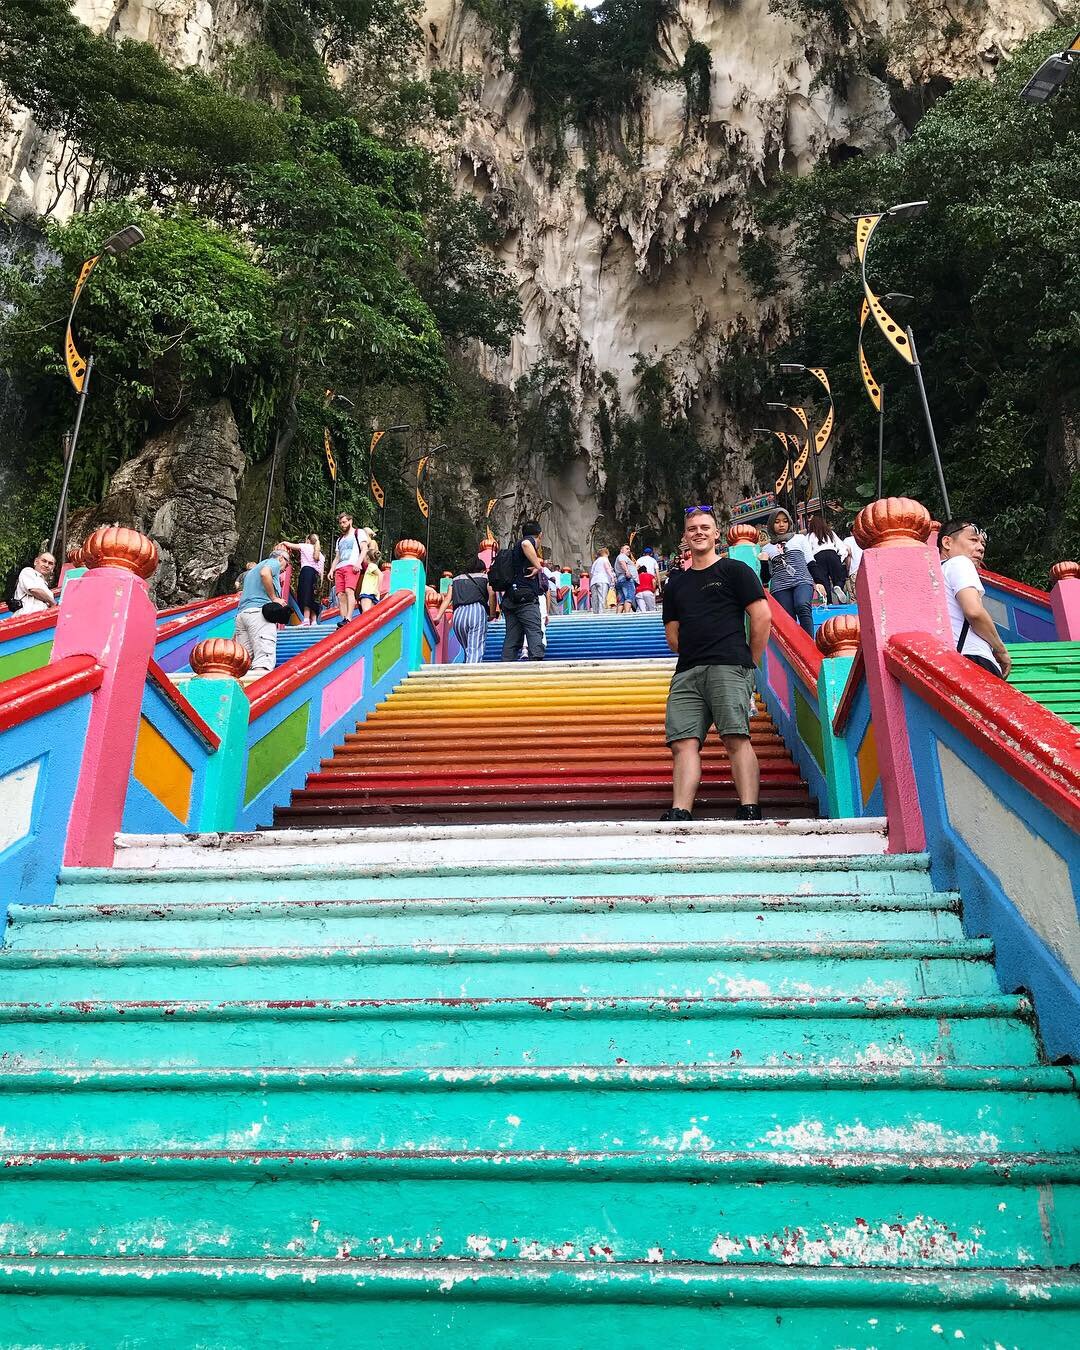 Looking up to Batu Caves